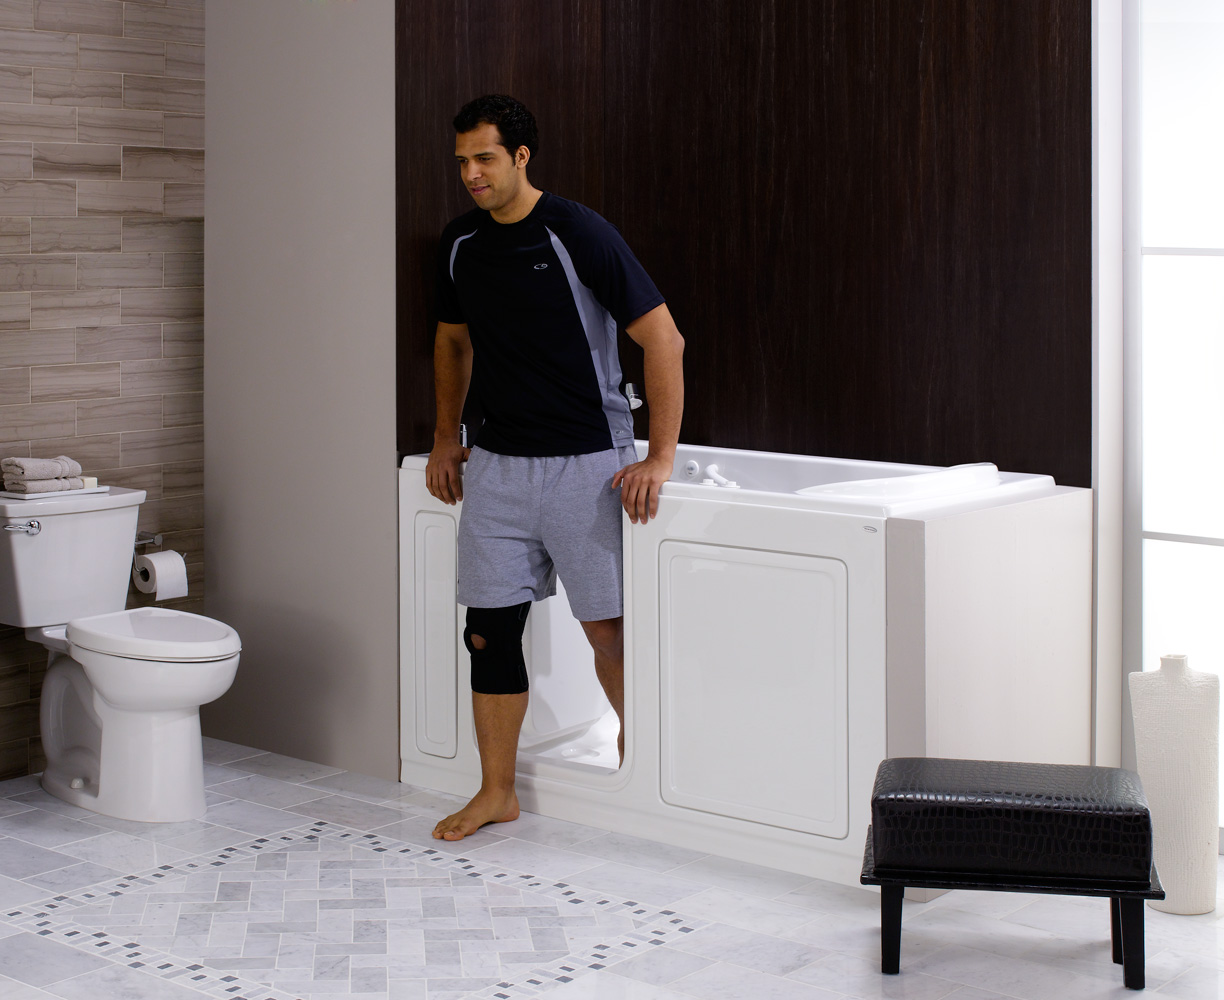 American Standard’s line of walk-in baths, including the Liberation by American Standard collection, received the commendation based on its innovative design that allows users to bathe with comfort and safety.